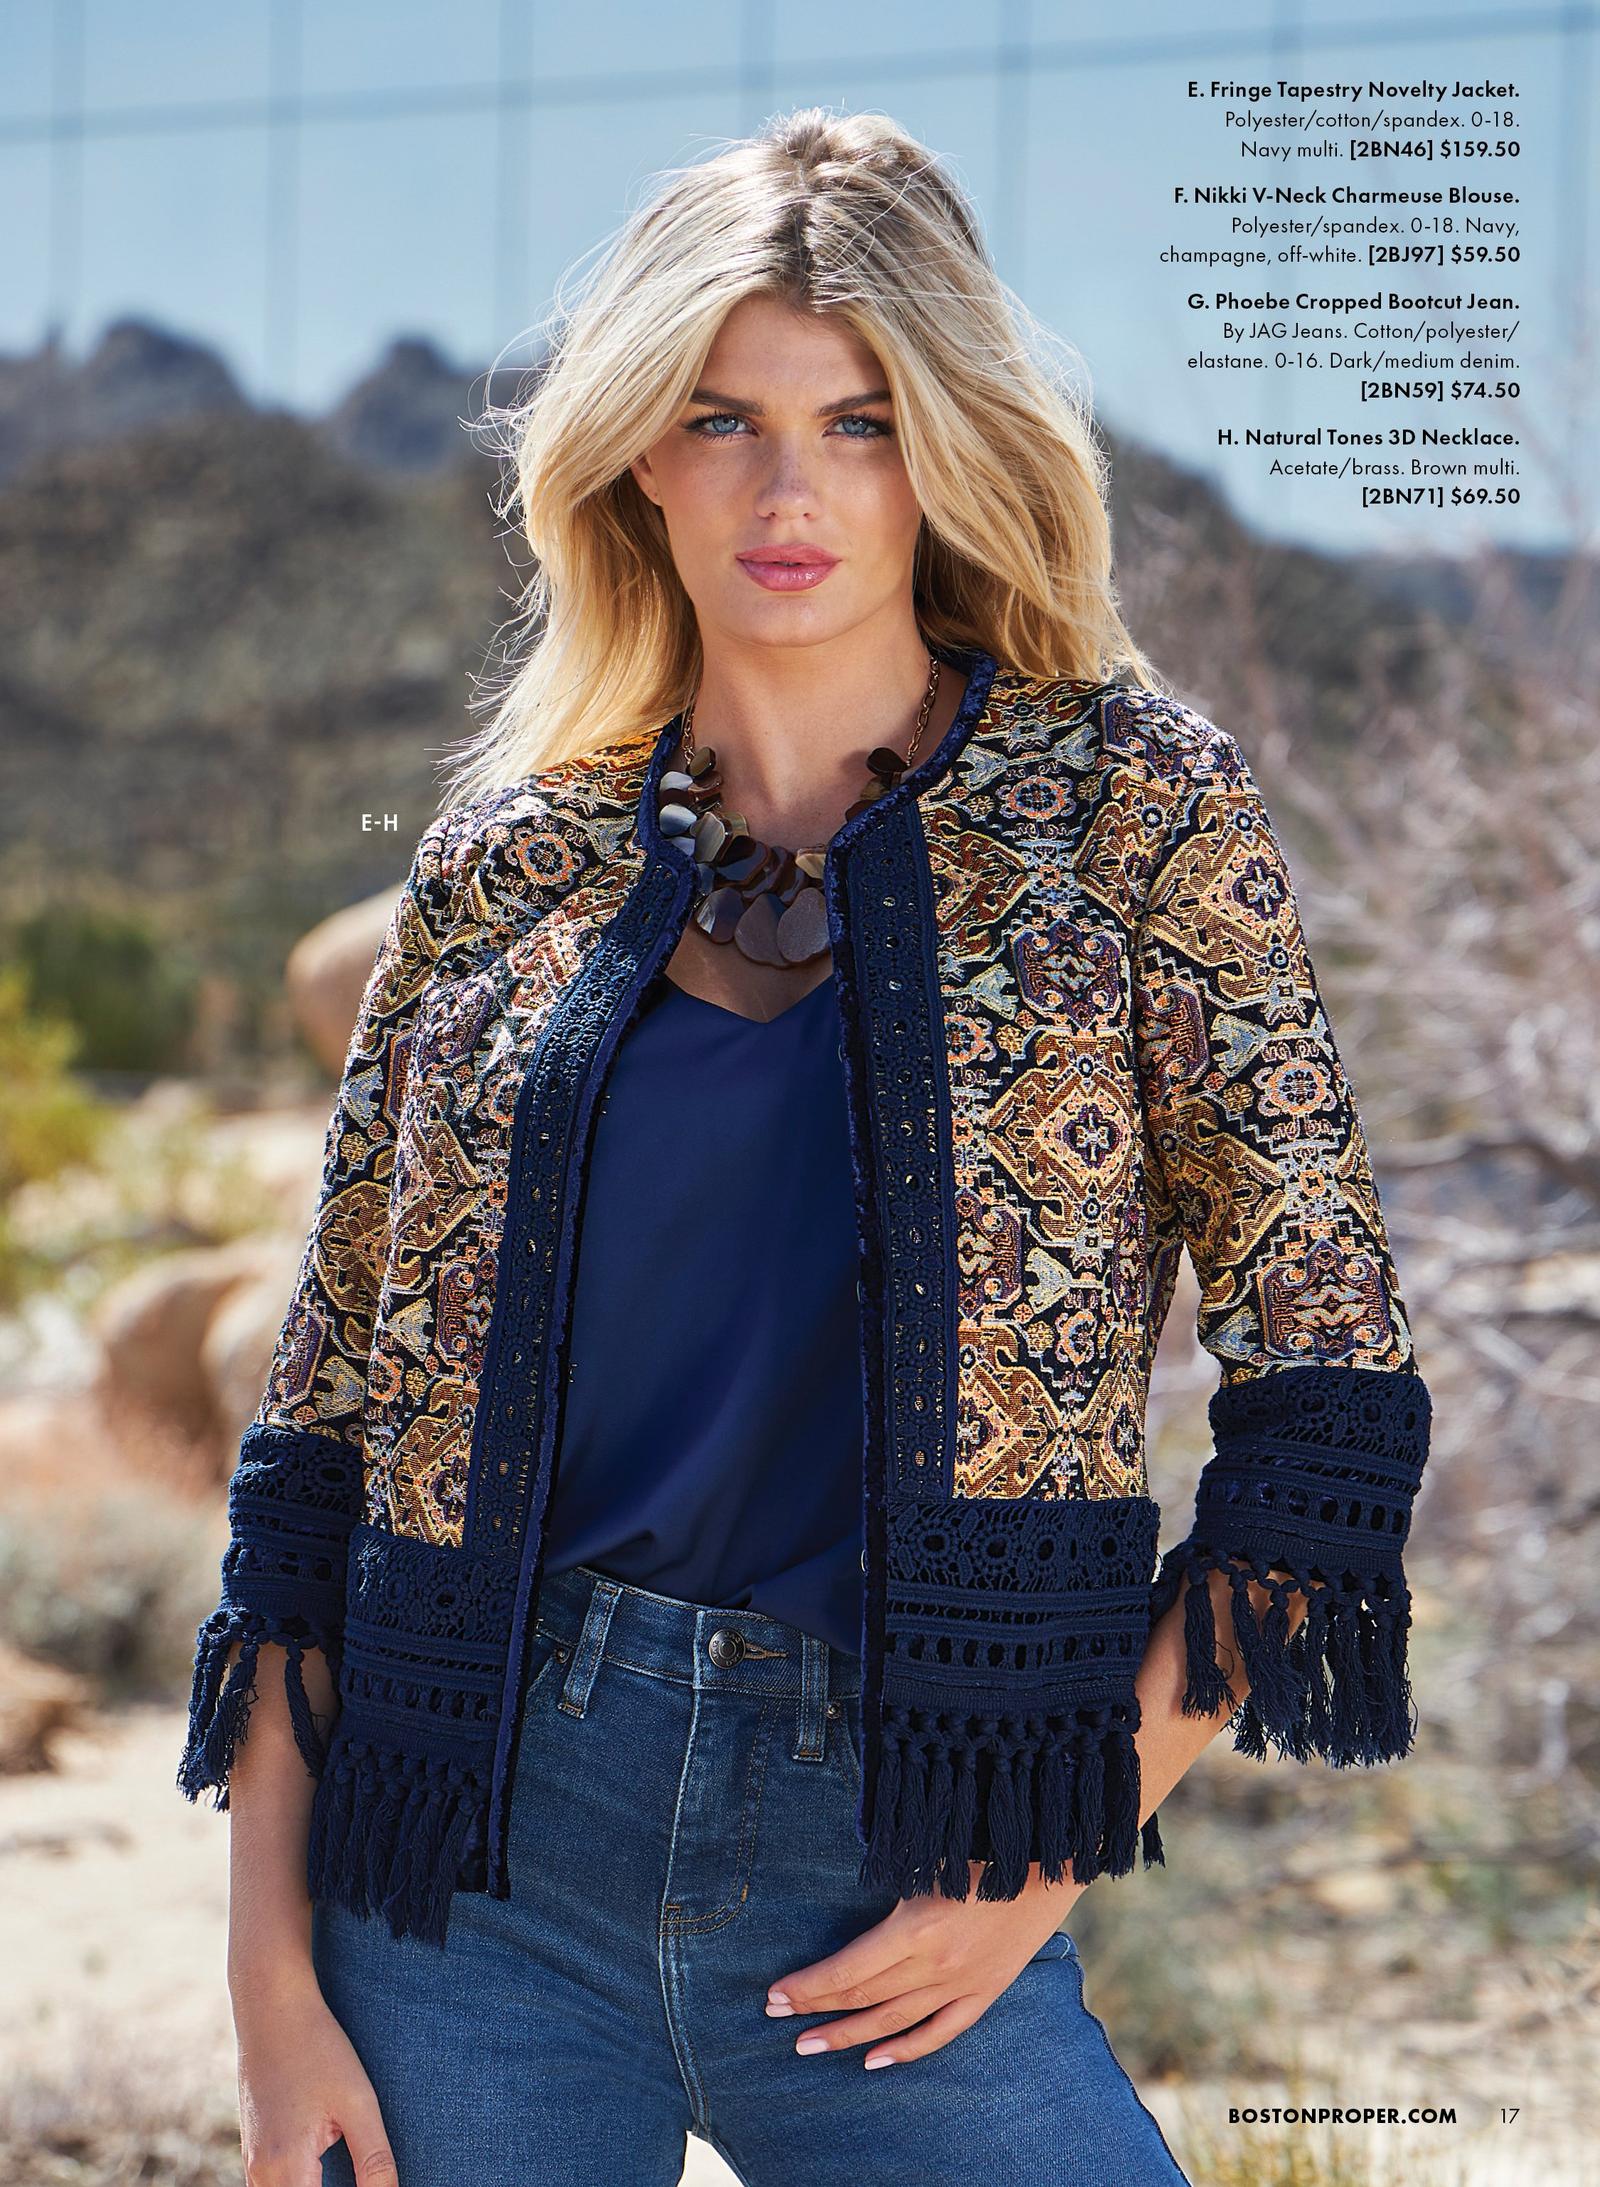 Model is wearing the fringe tapestry novelty jacket, nikki v-neck charmeuse blouse in navy, the phoebe cropped bootcut jean and the natural tones 3D Necklace.